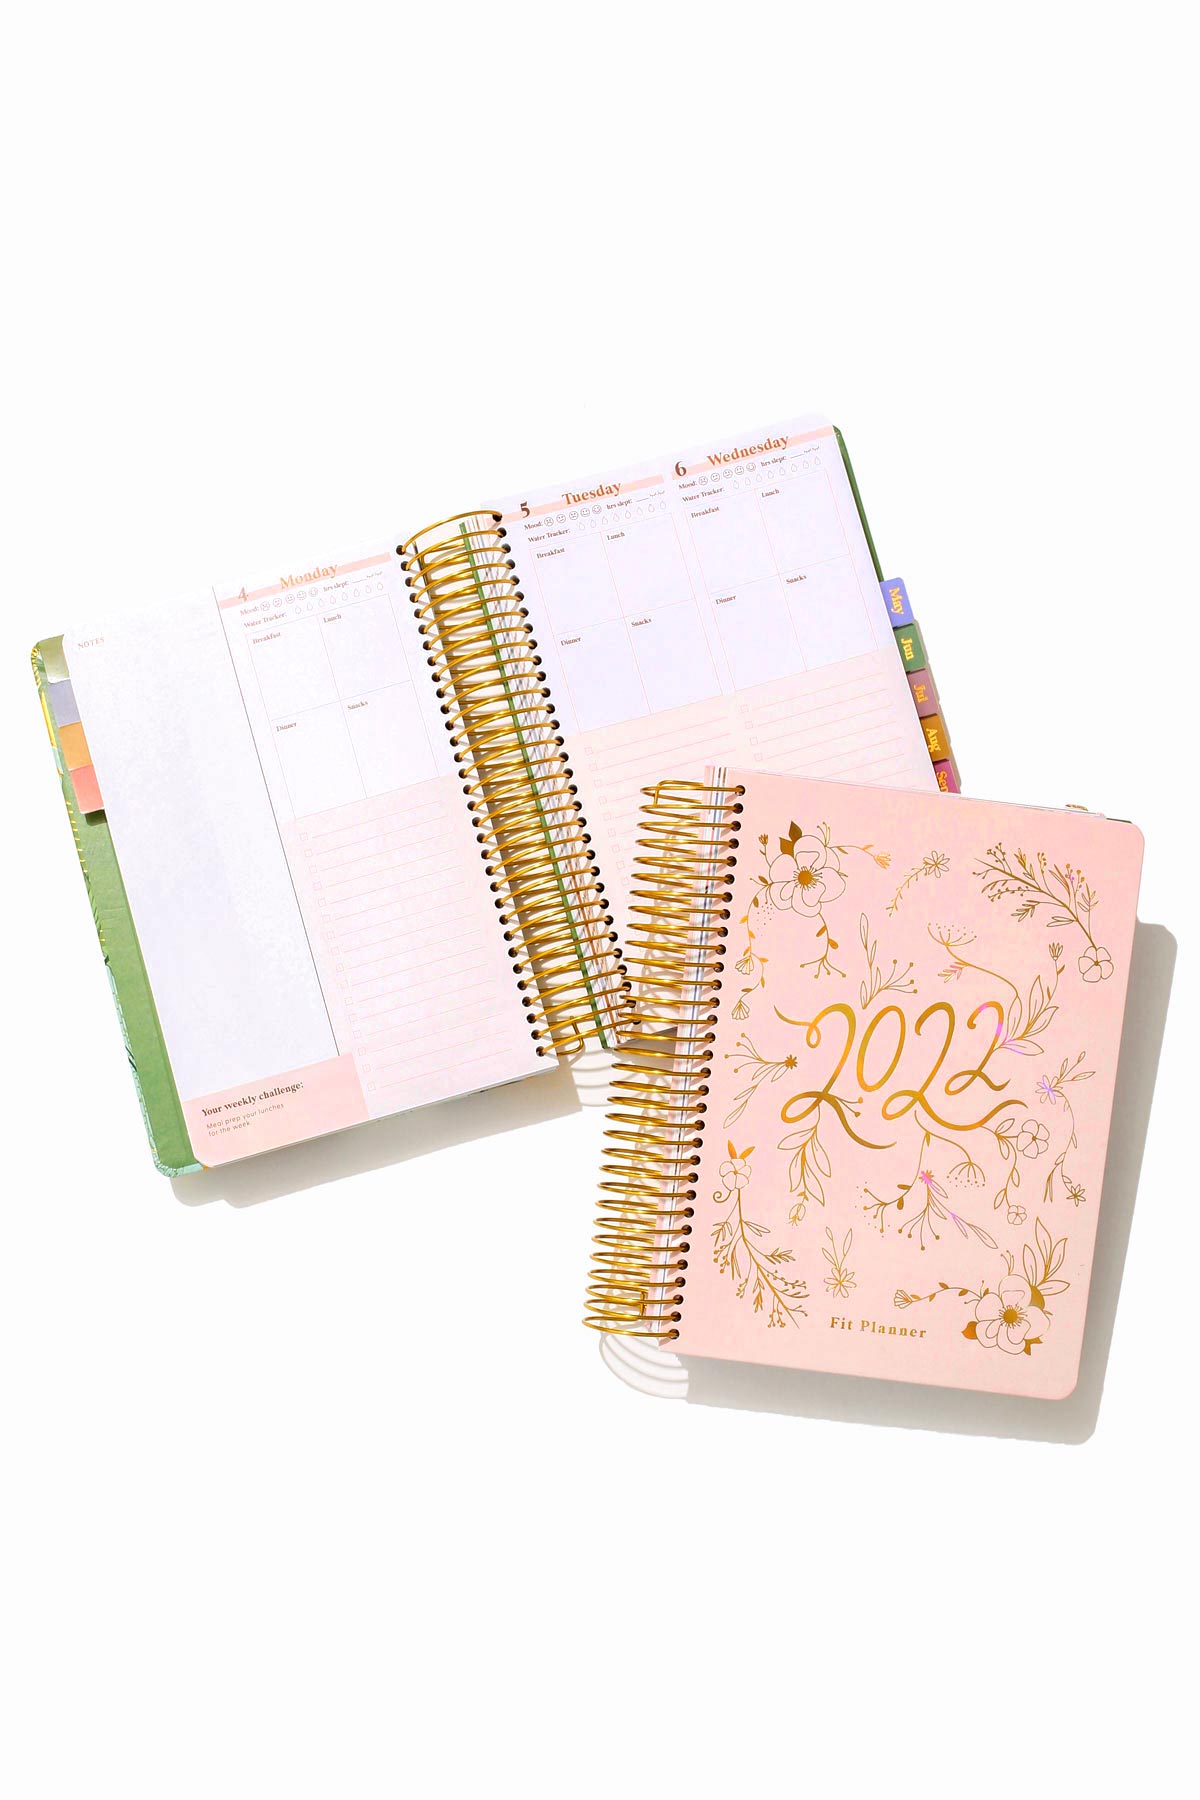 2022 popflex fit planner pink cover blushing blooms and inside preview